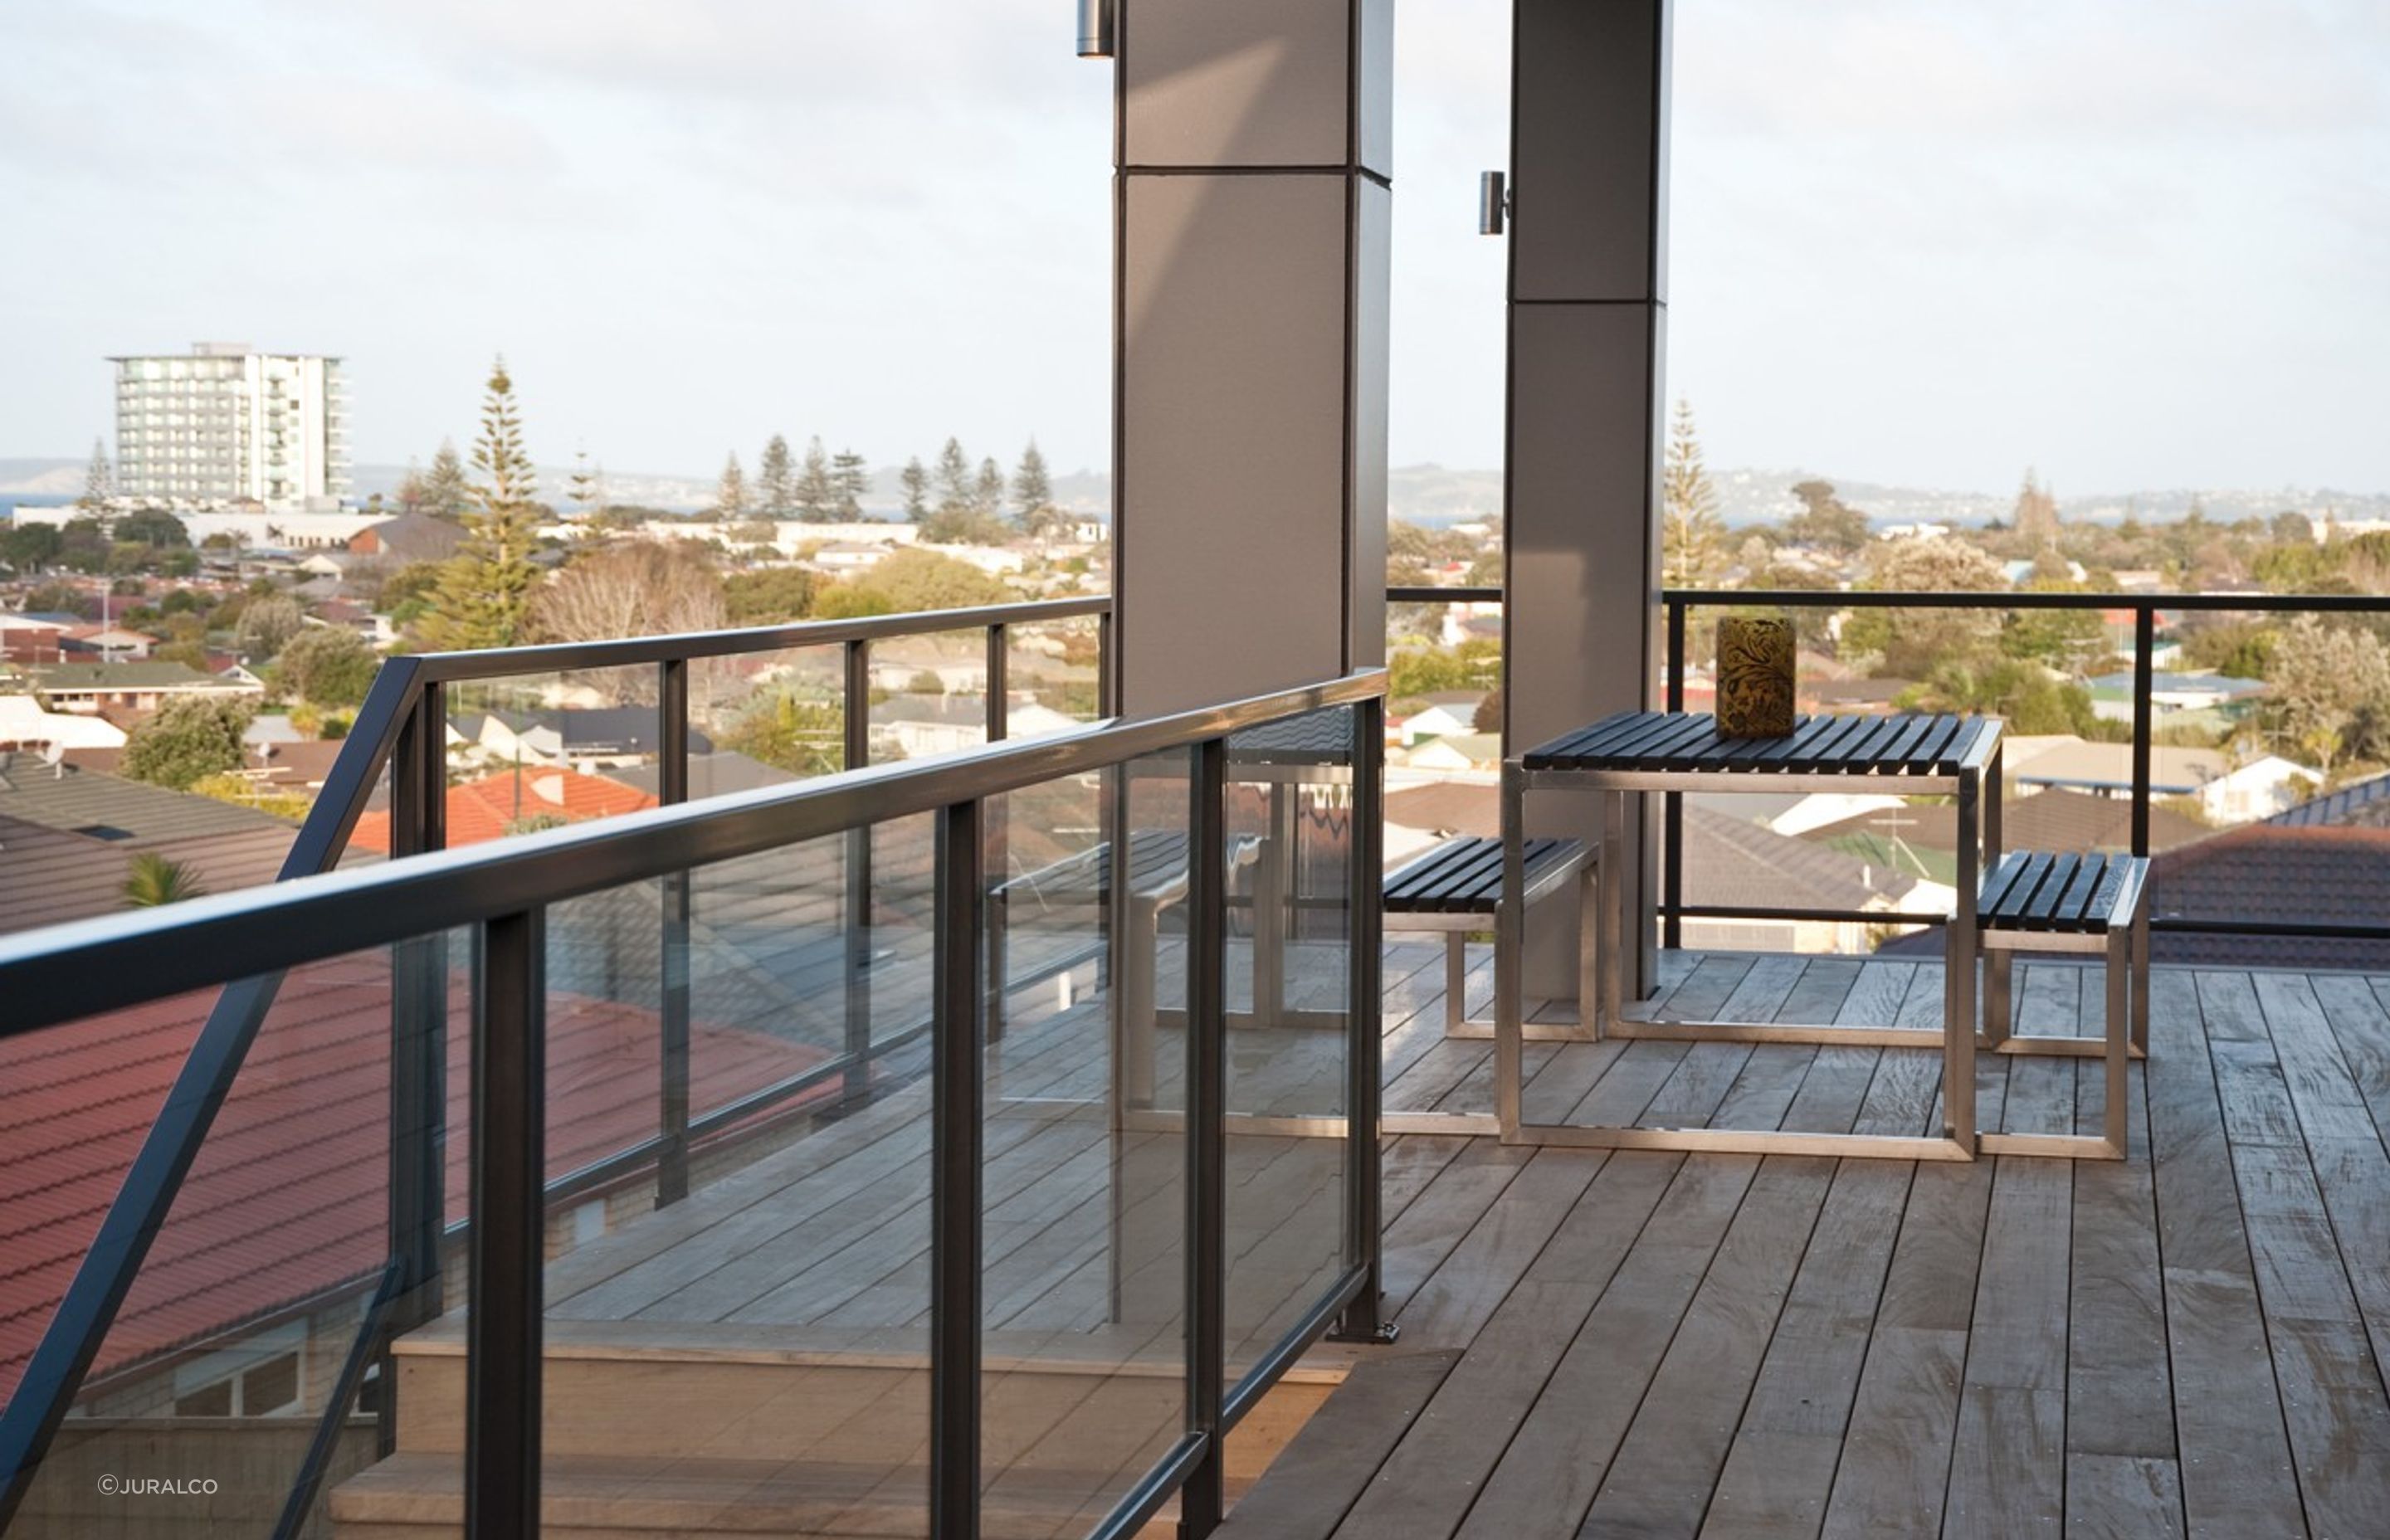 The Juralco Viking® Aluminium and Glass Balustrade System shows how materials can be successfully used in combination